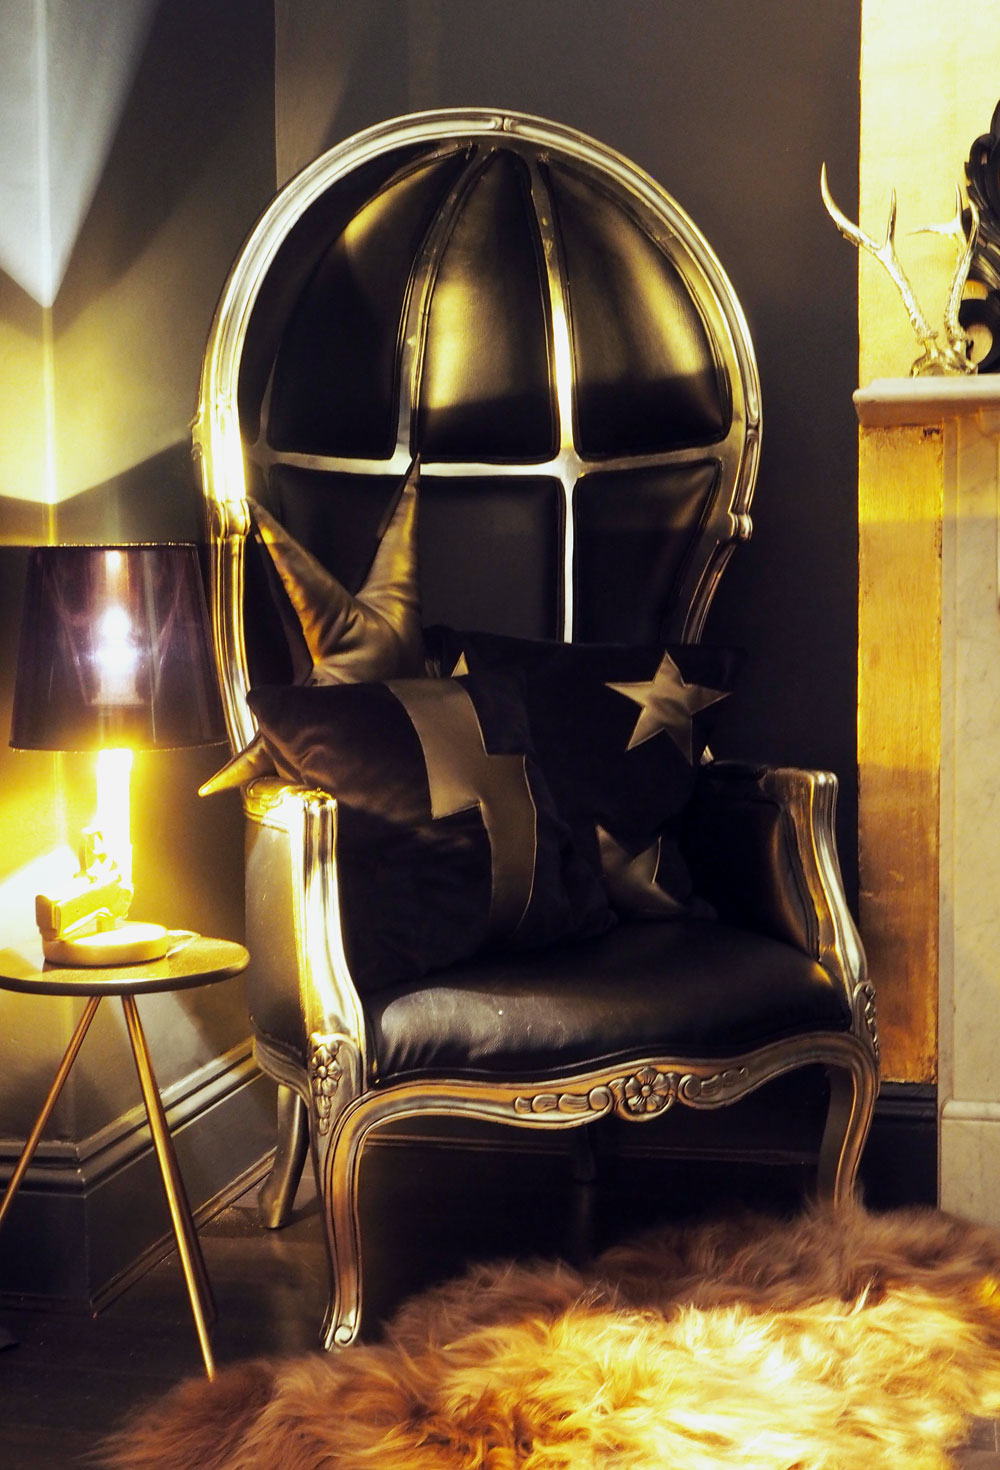 House Tour - Rachel Edmonds. Living room inspiration. Moody interiors. Dark colours and gold accents